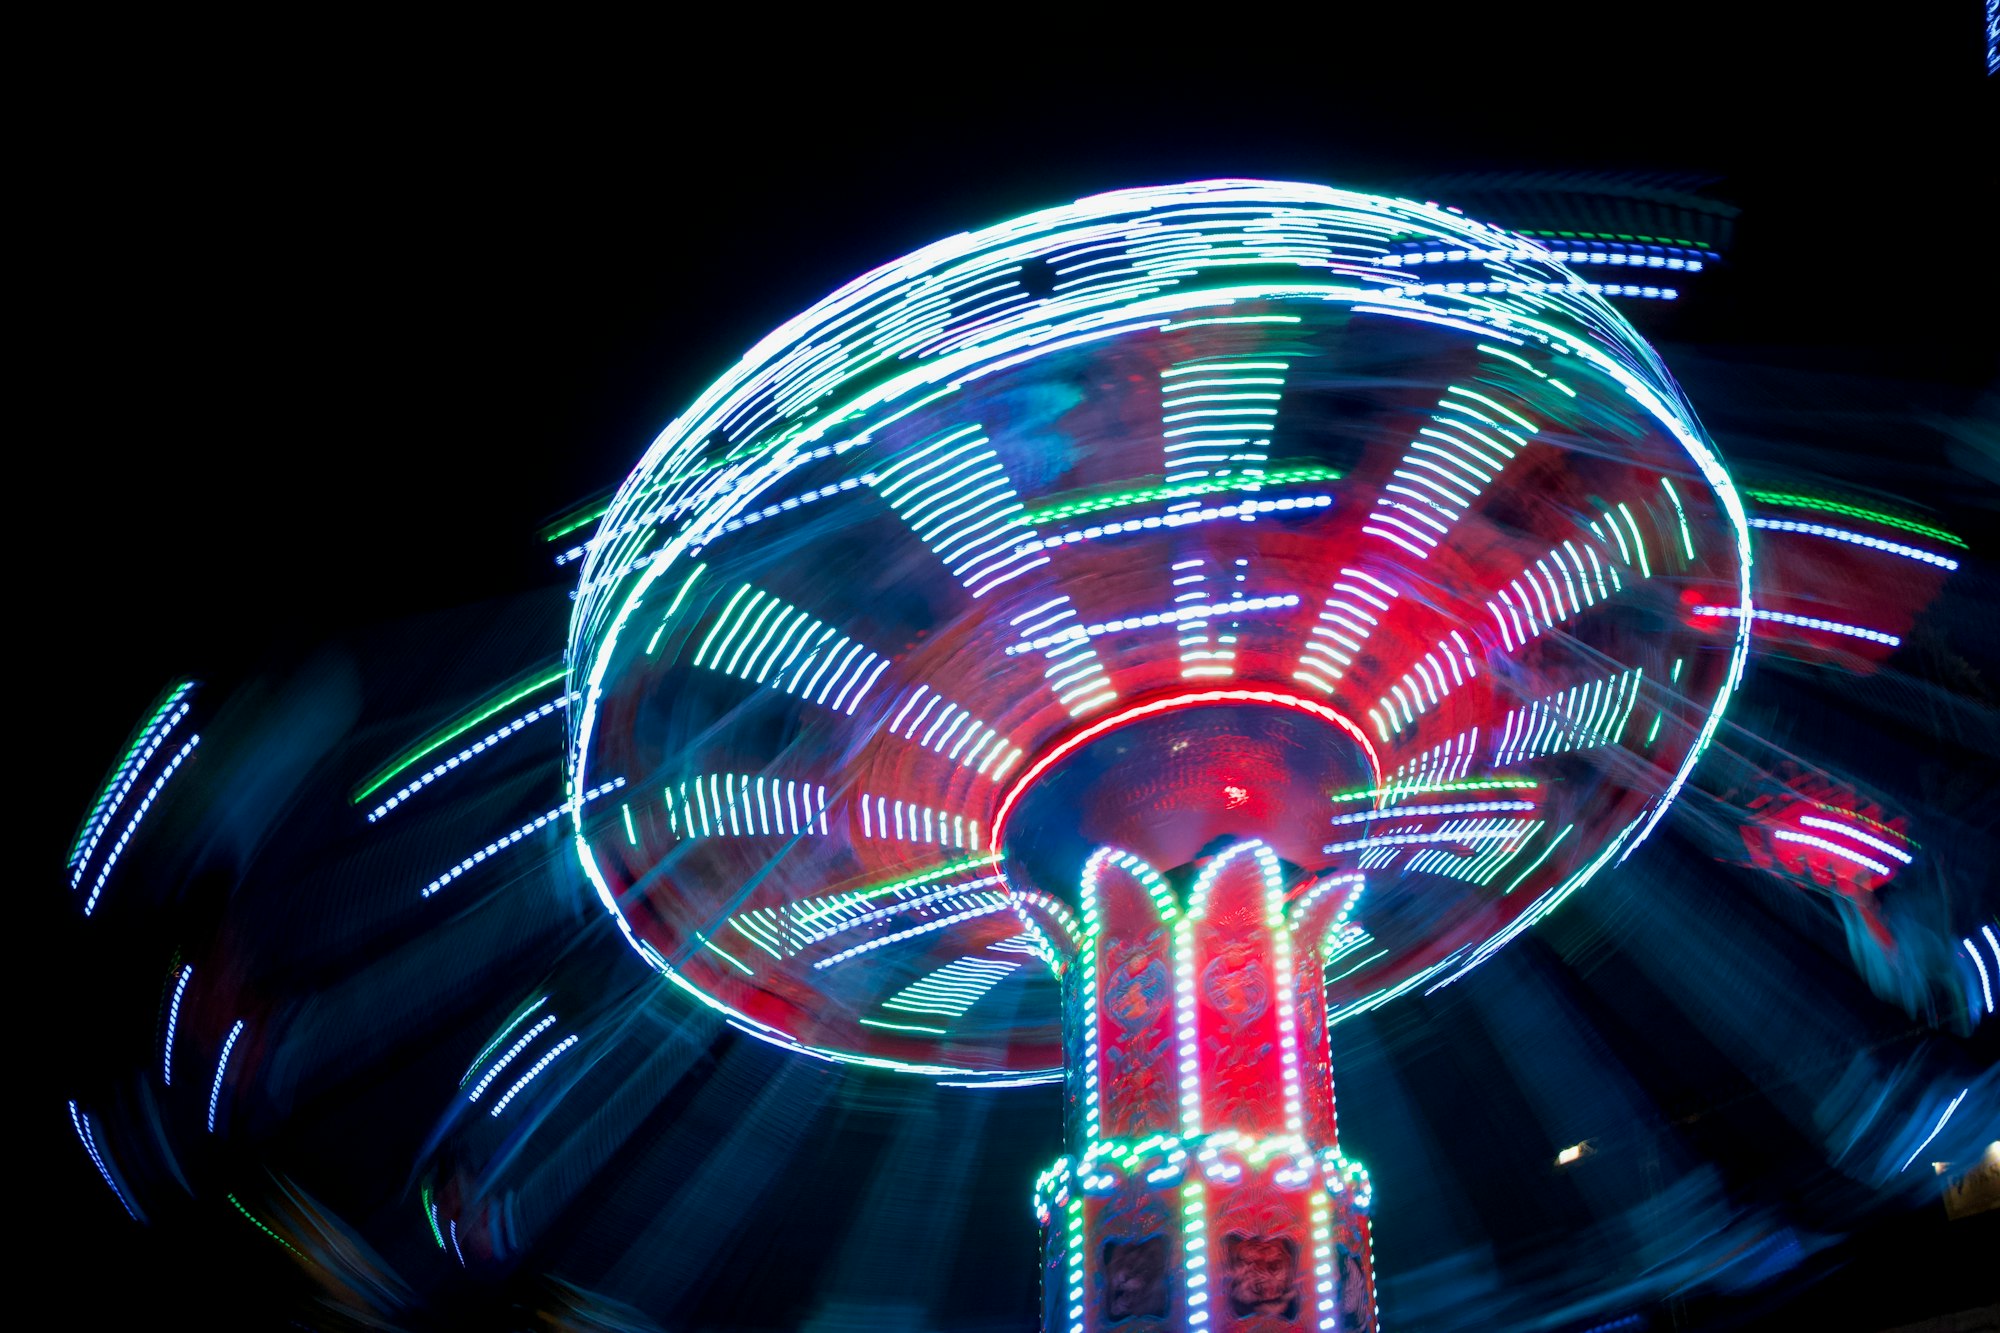 a time-lapsed spinning amusement park ride at night